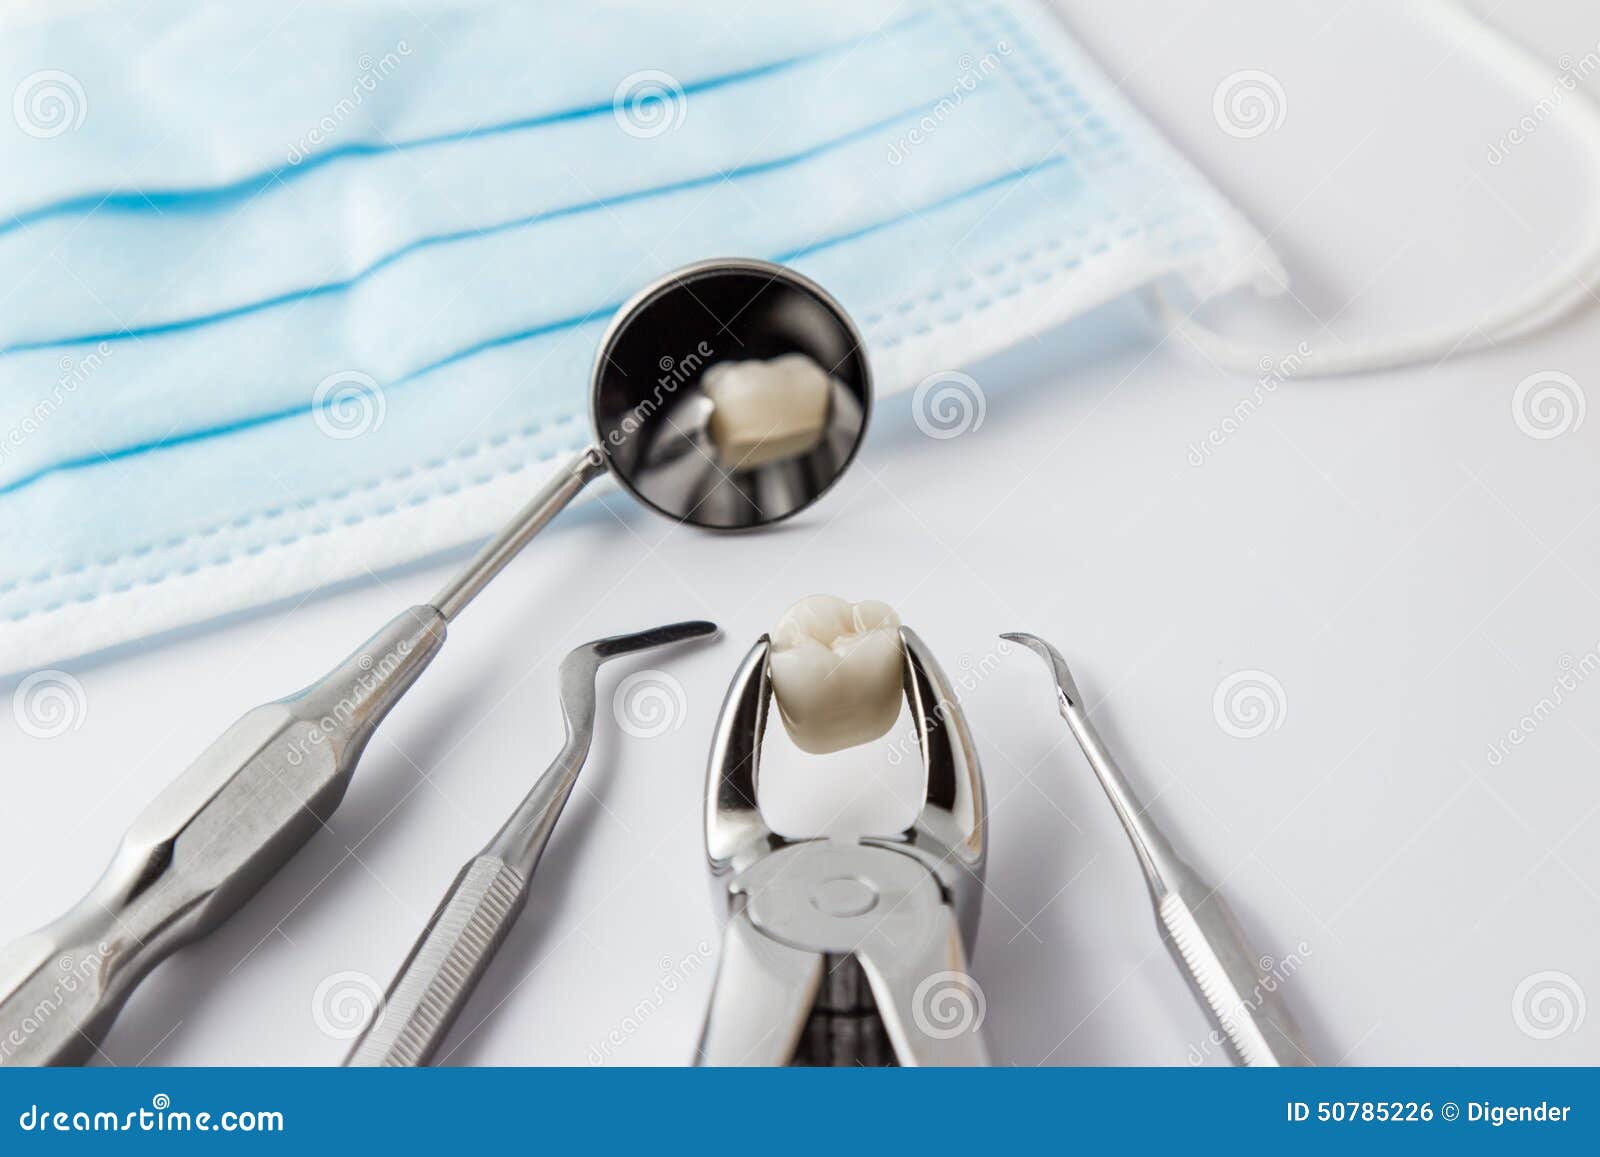 tooth extraction concept